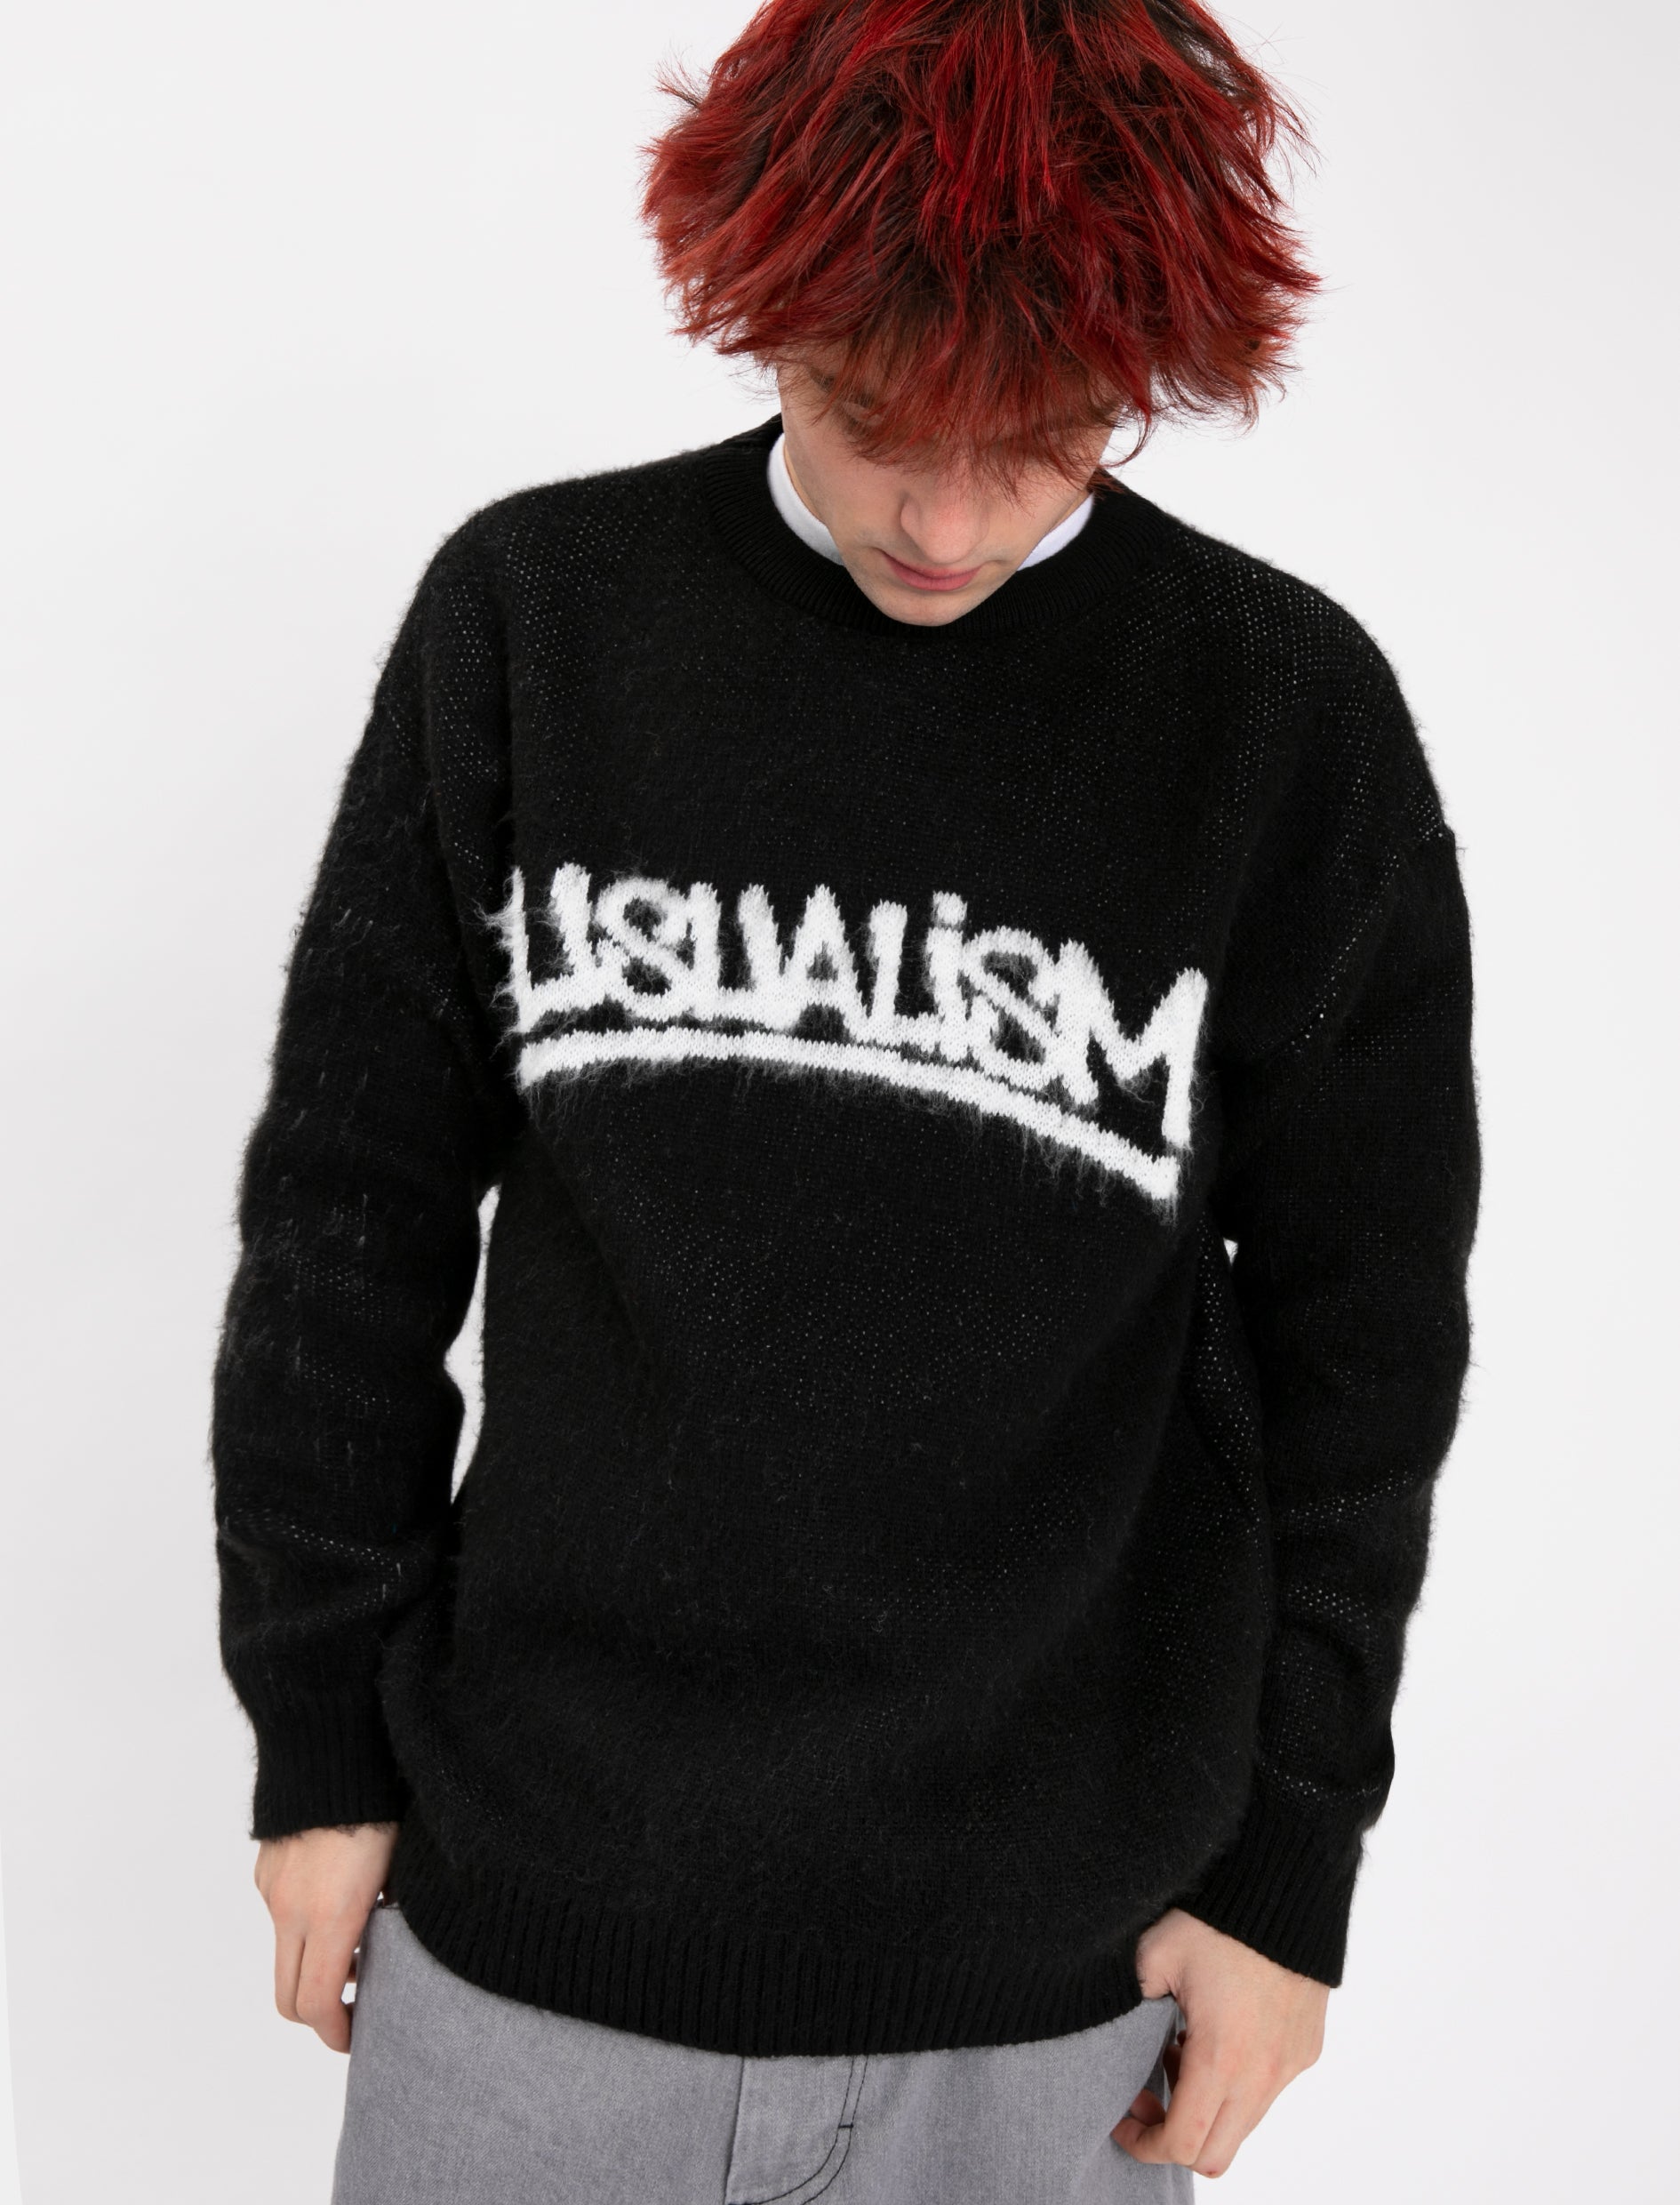 USUALISM SWEATER